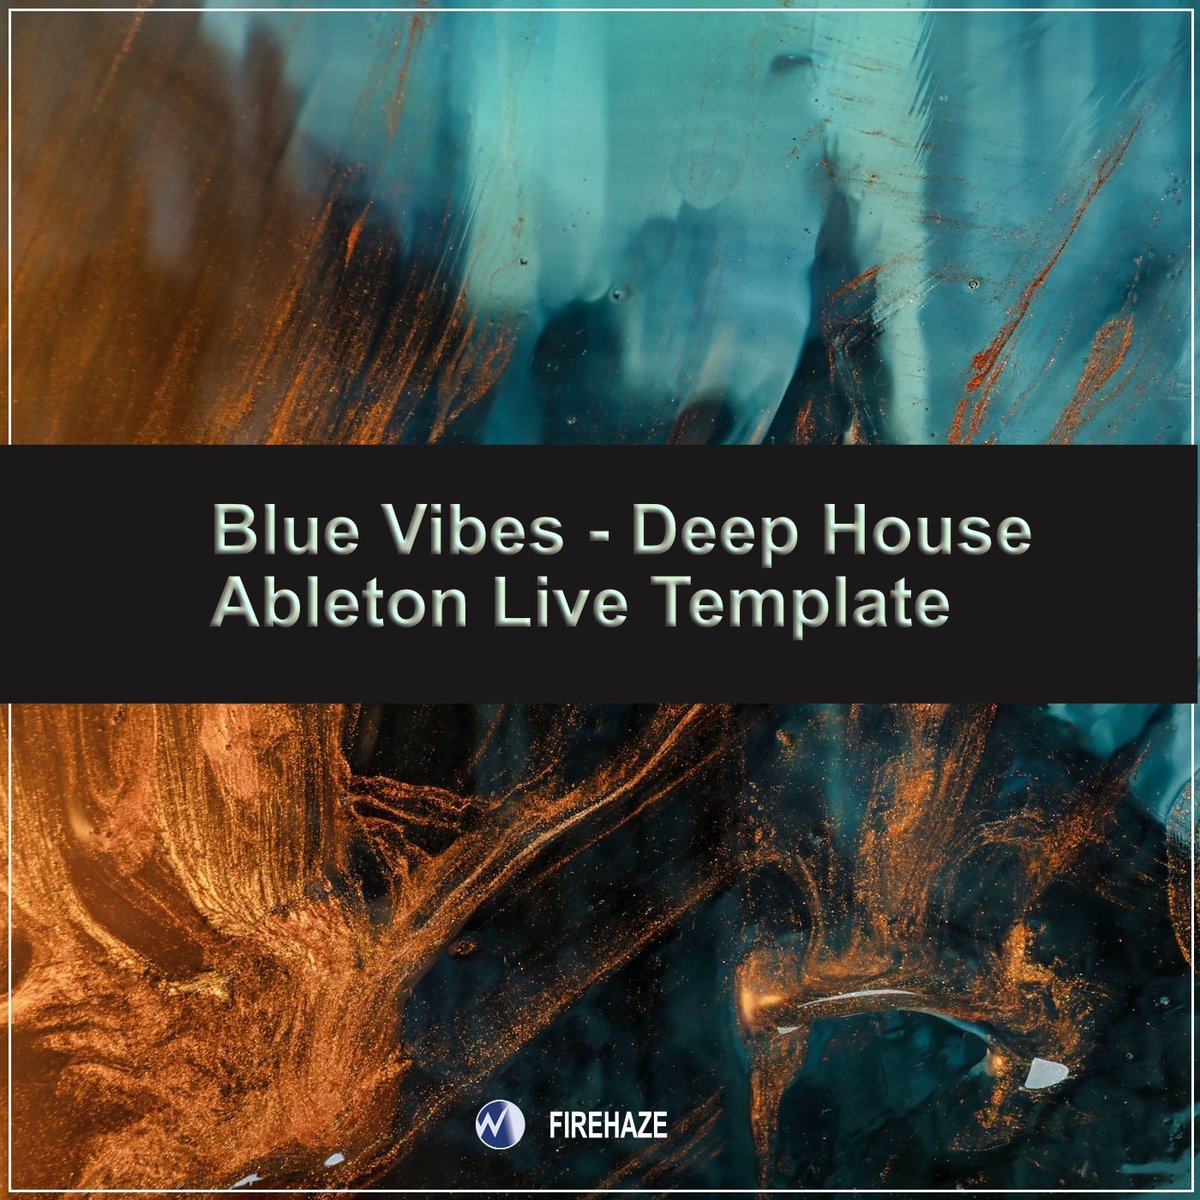 Blue Vibes - Deep House Ableton Live Template
Daw : Ableton 10.0.1

Download Project Files : 
wattsdancemusic.com/p-blue-vibes-d…

#newmusic #beatport #NewMusicAlert #beatportchart #studiorecord #recording